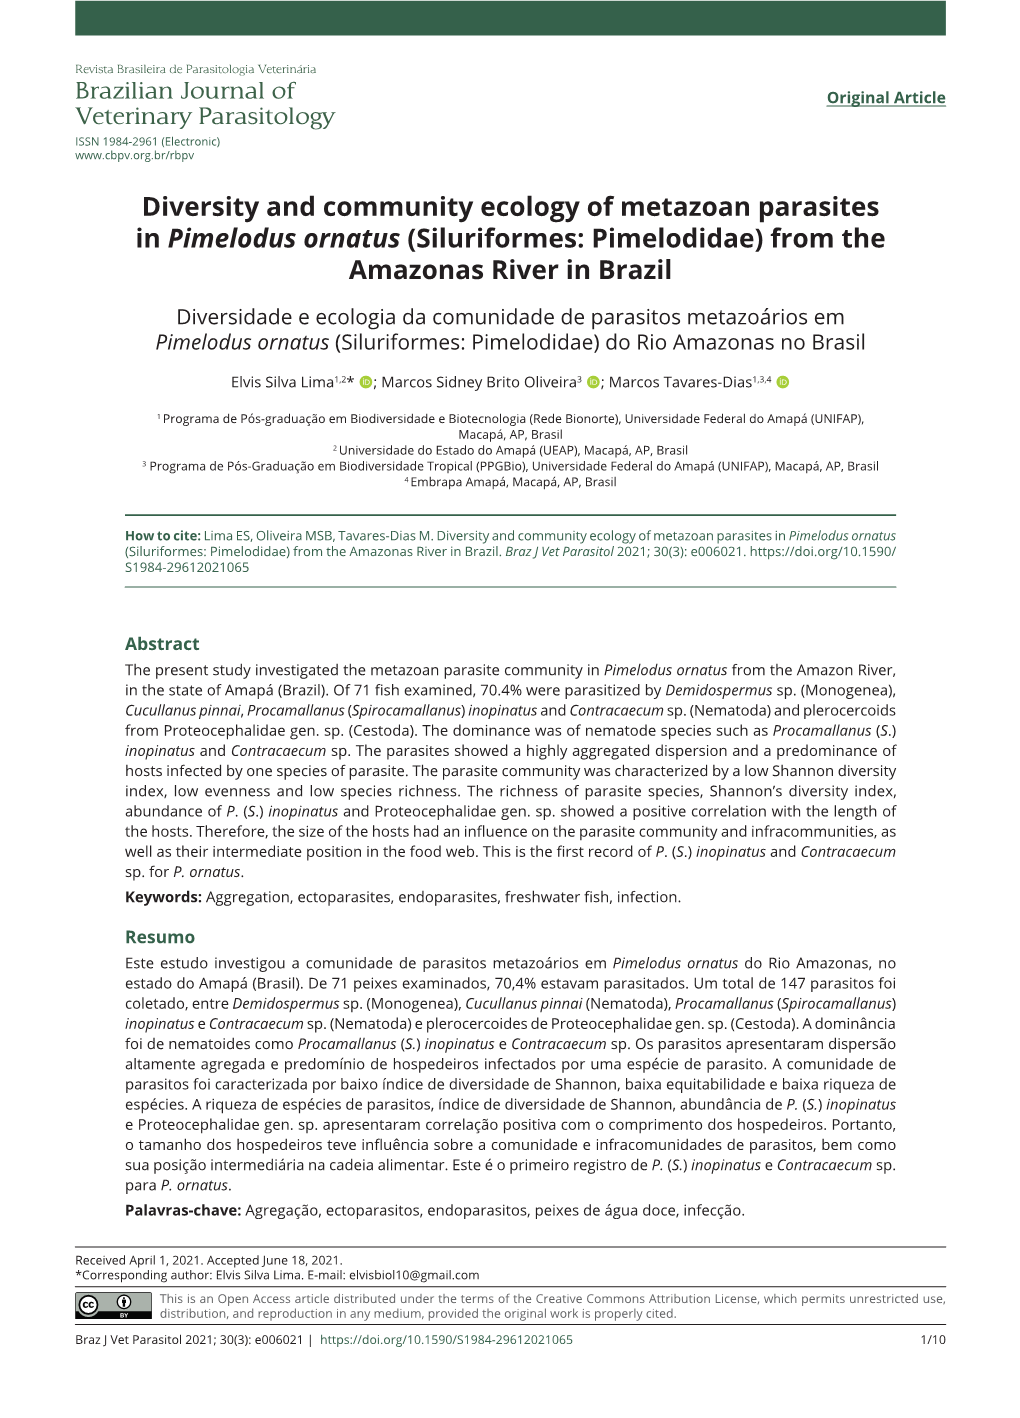 Diversity and Community Ecology of Metazoan Parasites in Pimelodus Ornatus (Siluriformes: Pimelodidae) from the Amazonas River in Brazil